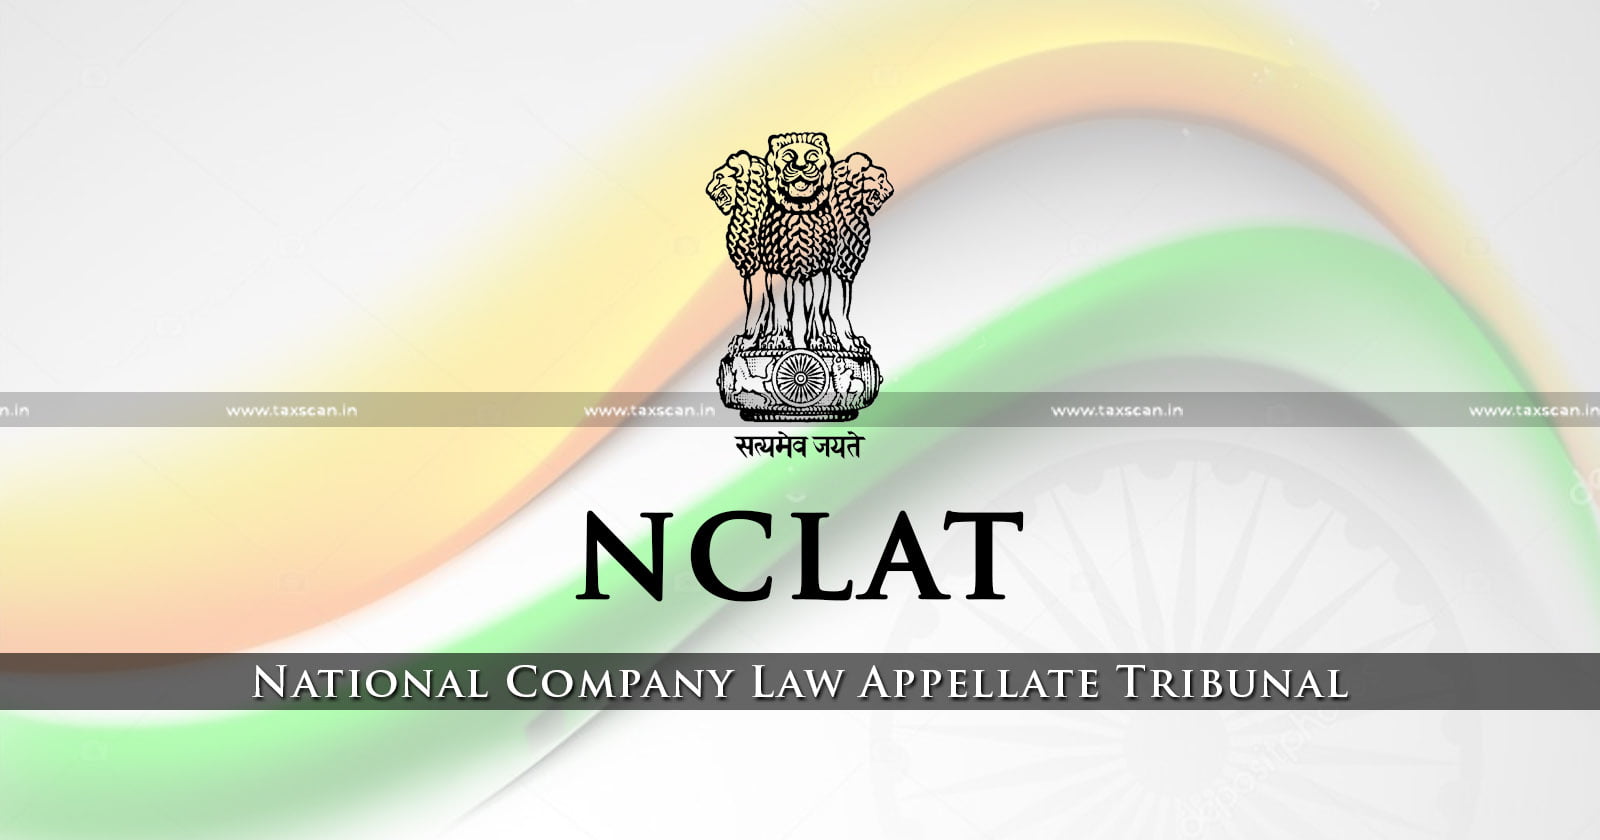 NCLAT - Security Refund - Financial Debt - Security Refund Of Advance Amount - TAXSCAN